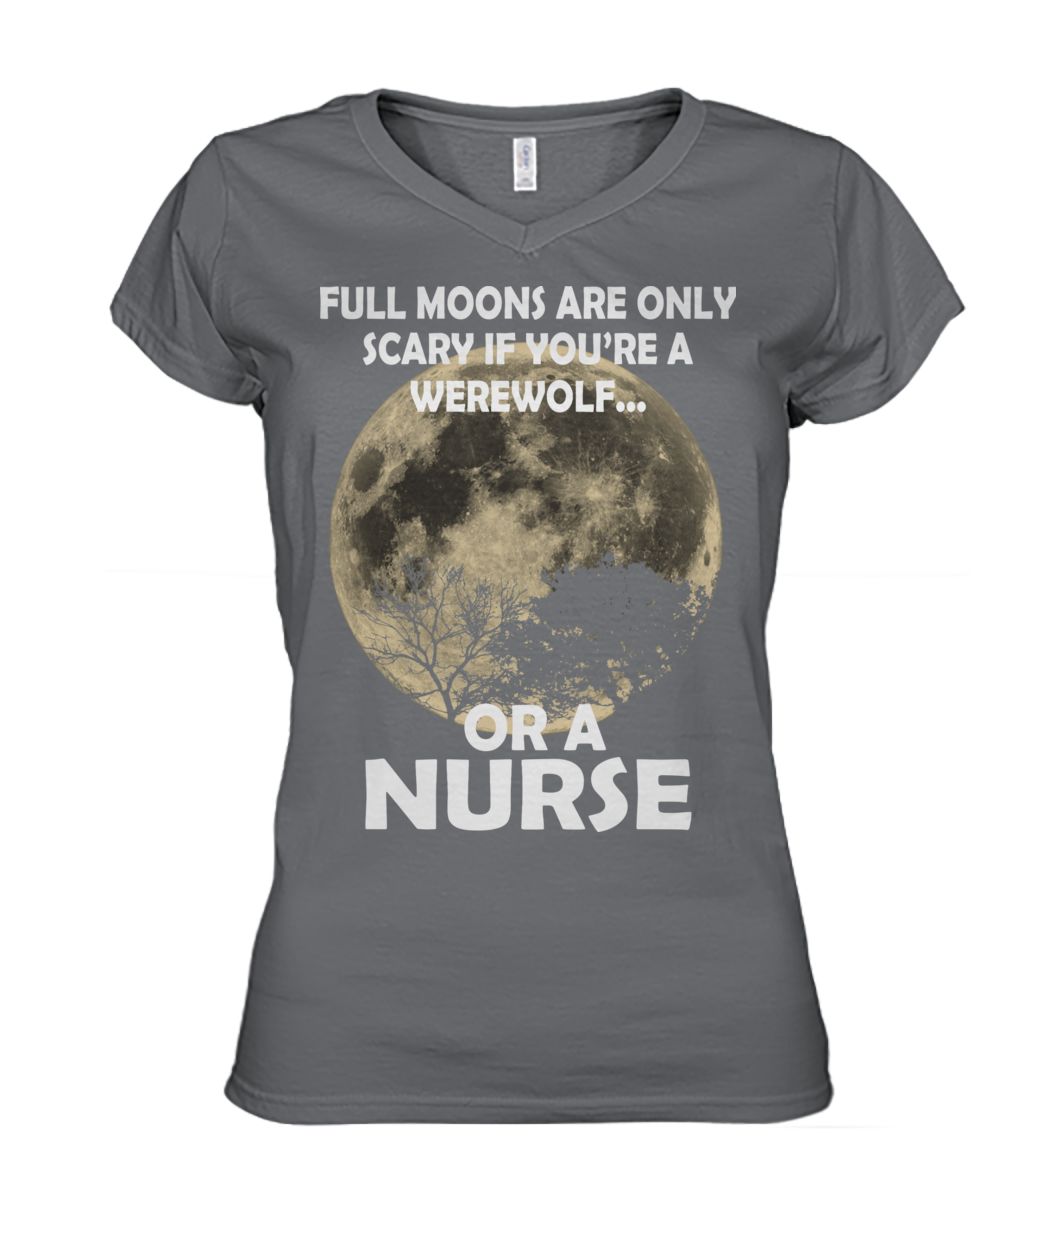 Full moons are only scary if you're a werewolf or a nurse women's v-neck